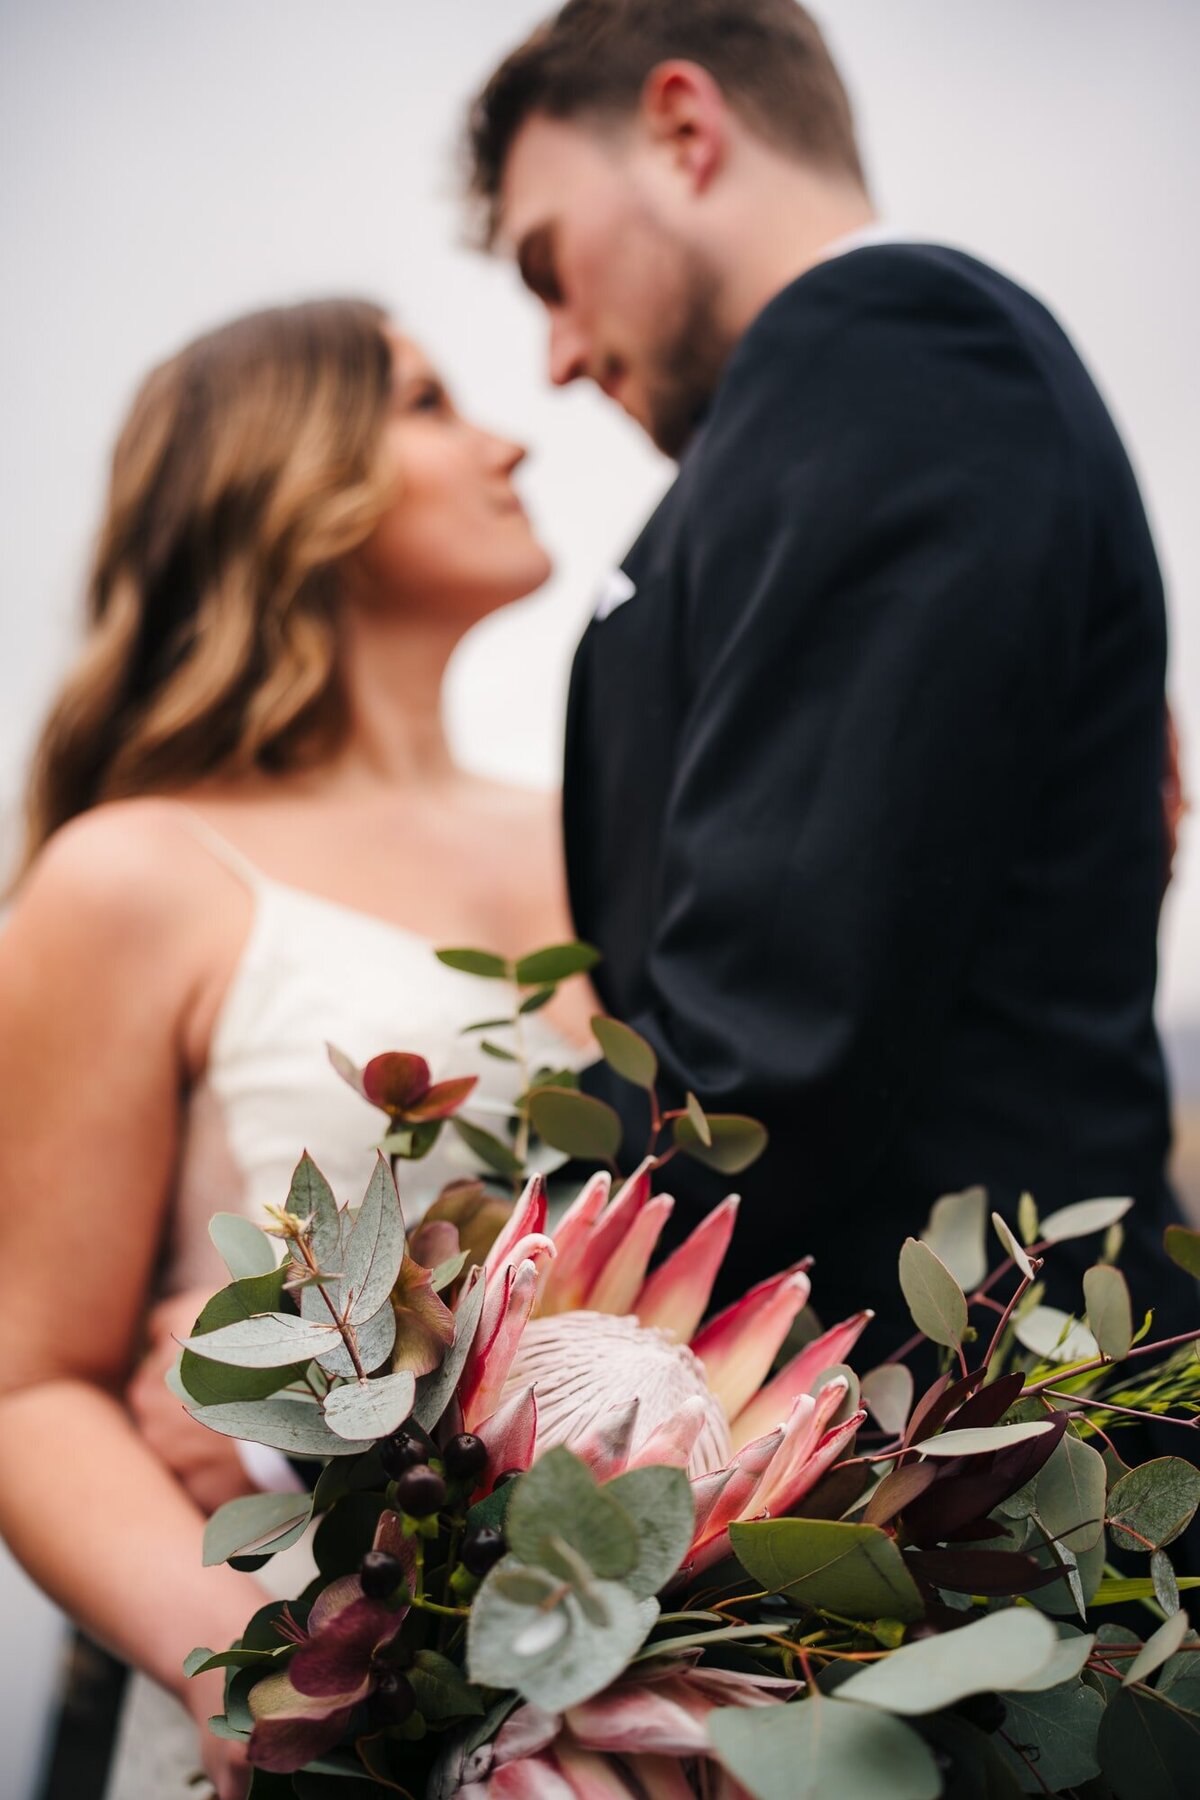 With the couple as a delightful backdrop, the focus shifts to a stunning bouquet of flowers, adding a burst of color and romance to the scene.